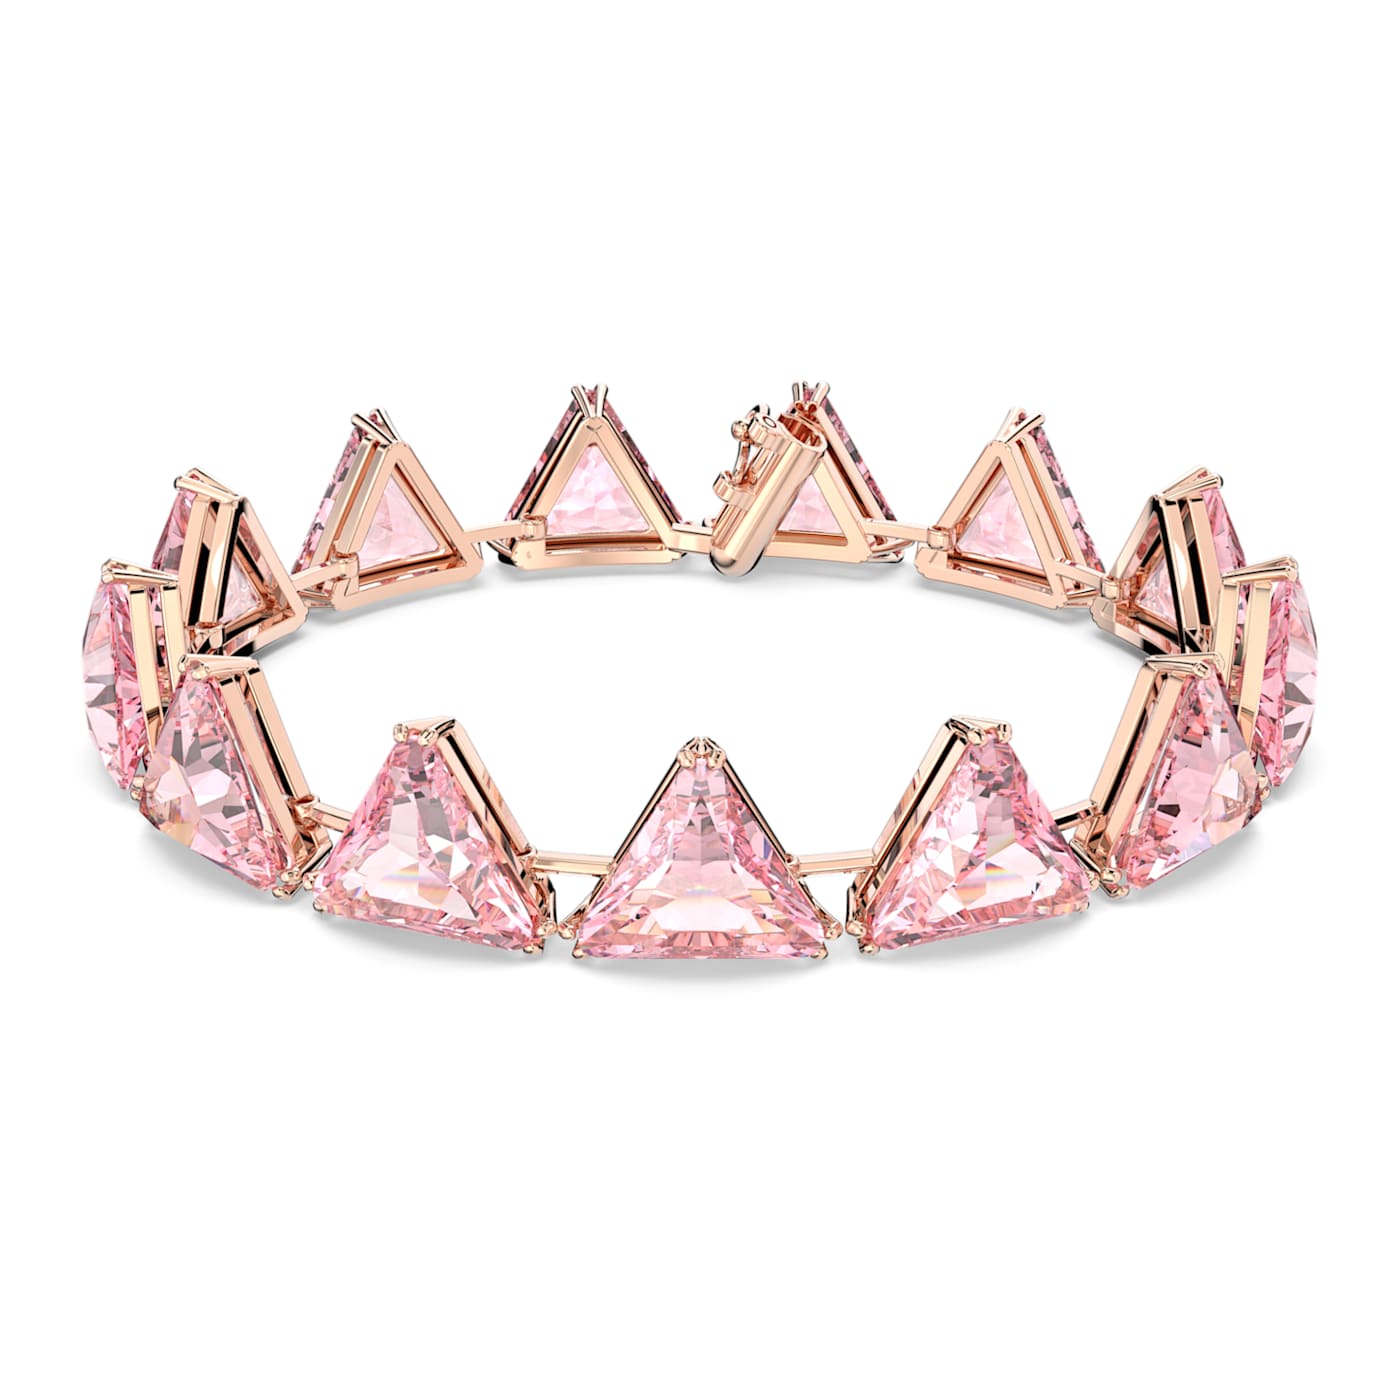 ORTYX PINK BRACELET, TRIANGLE CUT CRYSTALS, ROSE-GOLD TONE PLATED